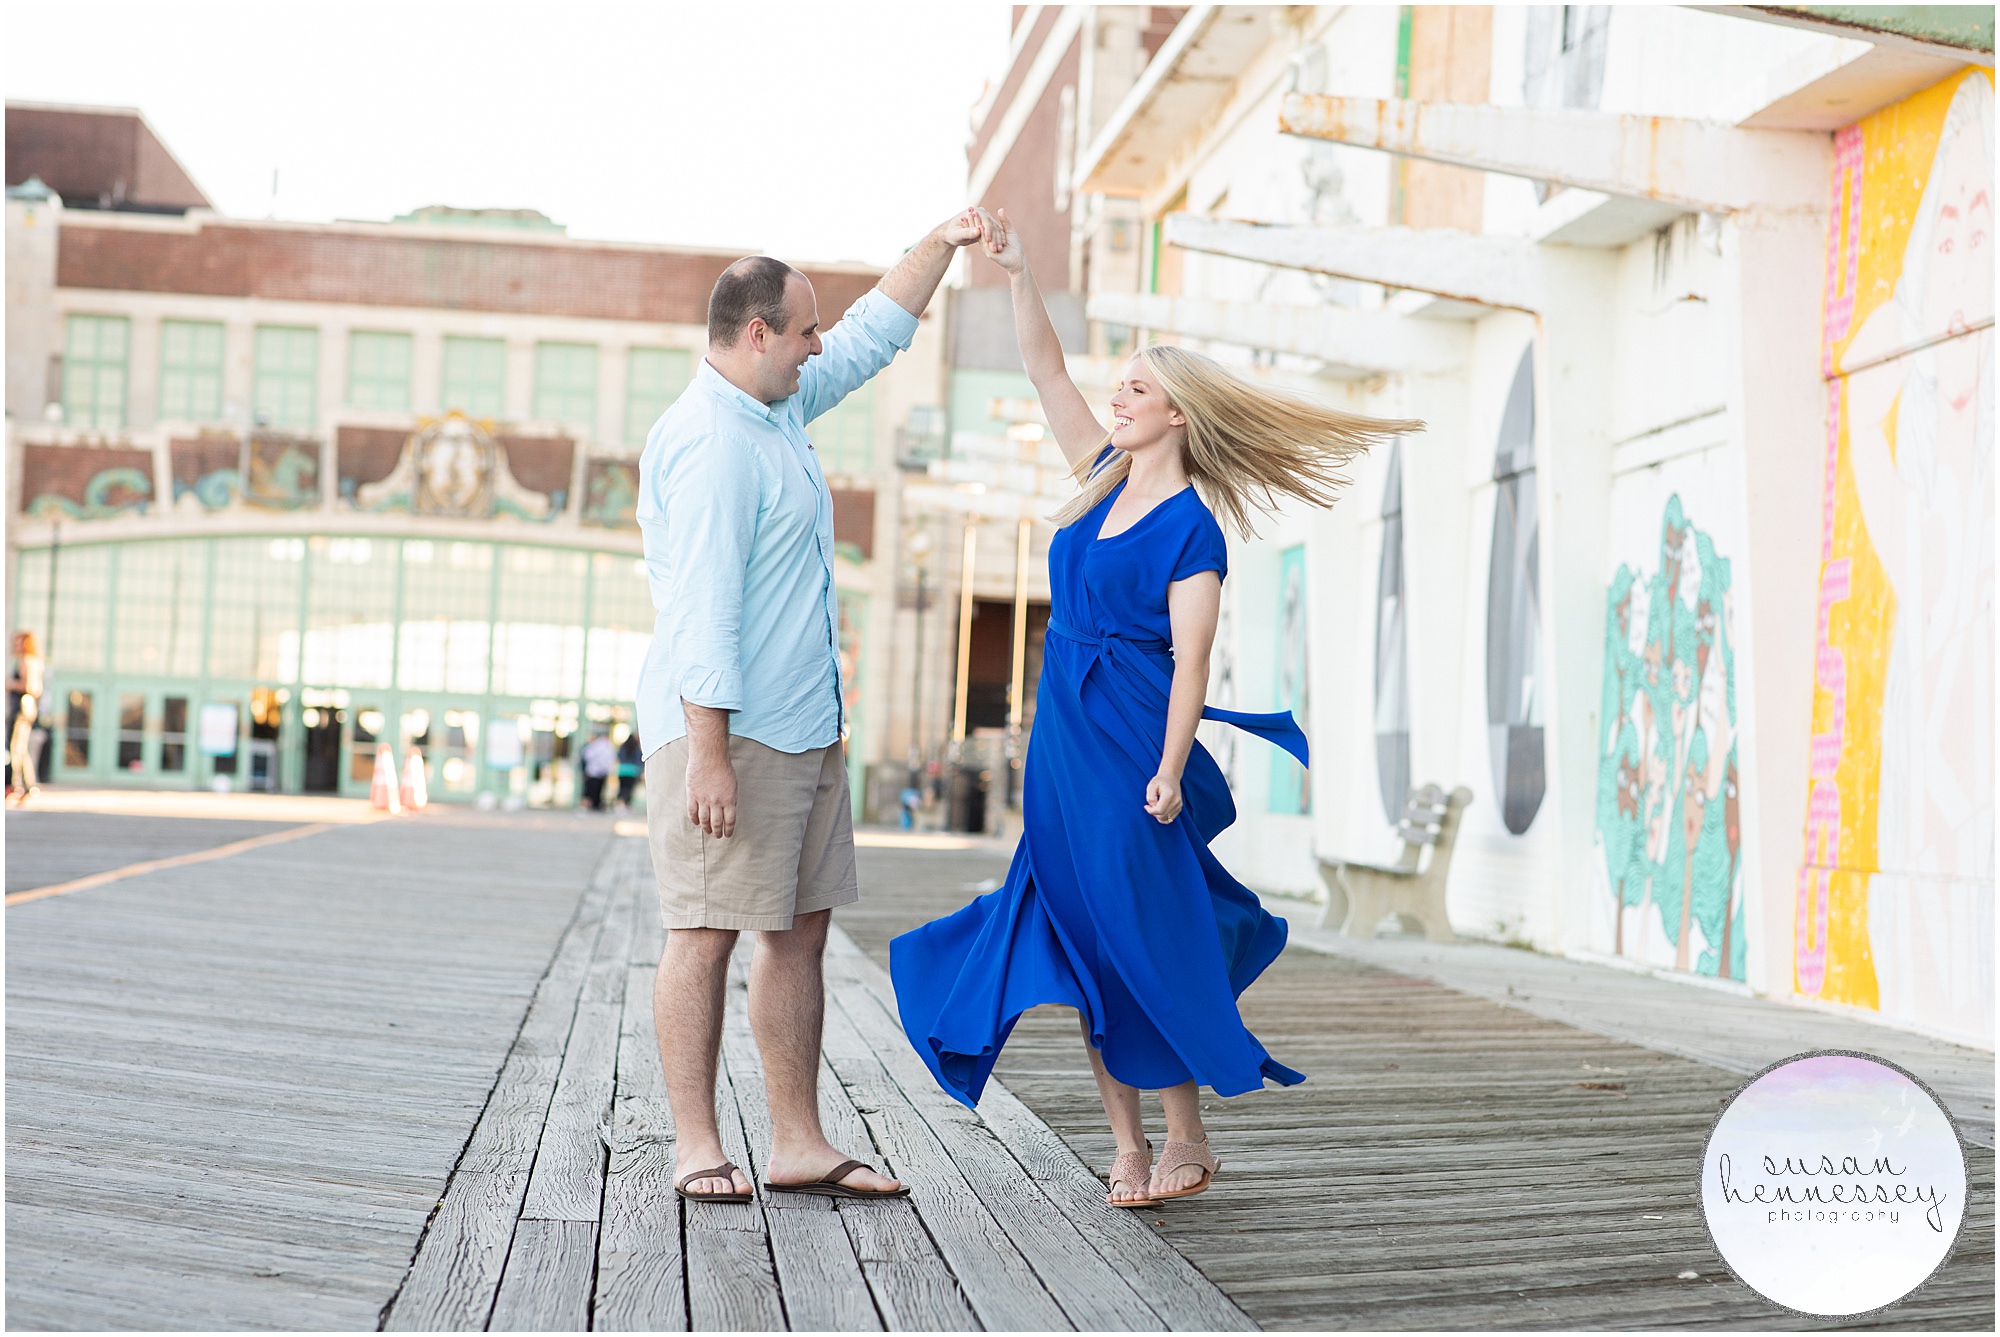 Engagement Session at Asbury Park, groom to be twirls bride to be. 